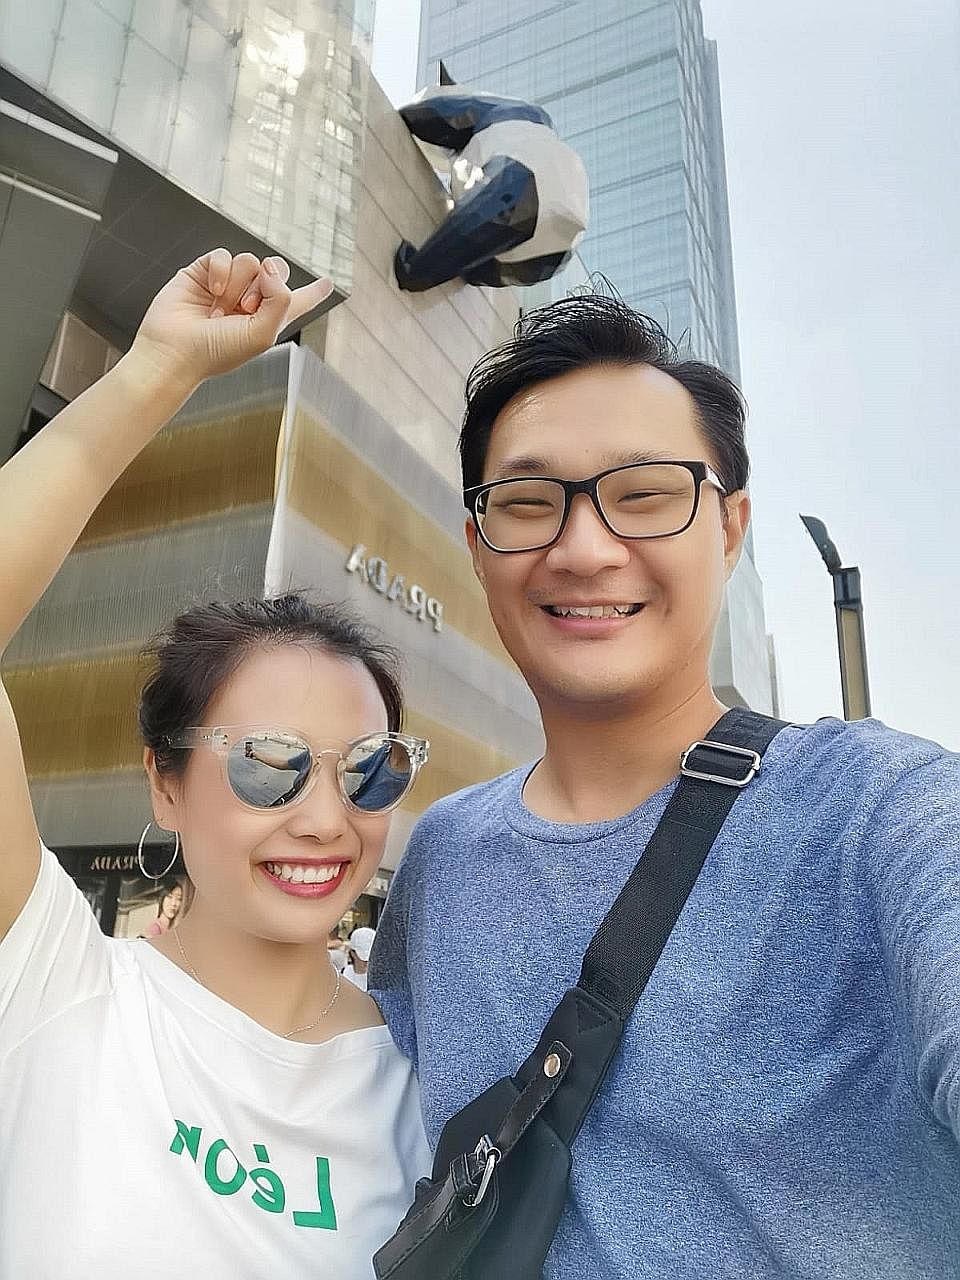 Mr Suen Tat Yam visited Chengdu with his then girlfriend Clara, who is now his wife (both left), in 2019 and hopes to visit again after the pandemic.